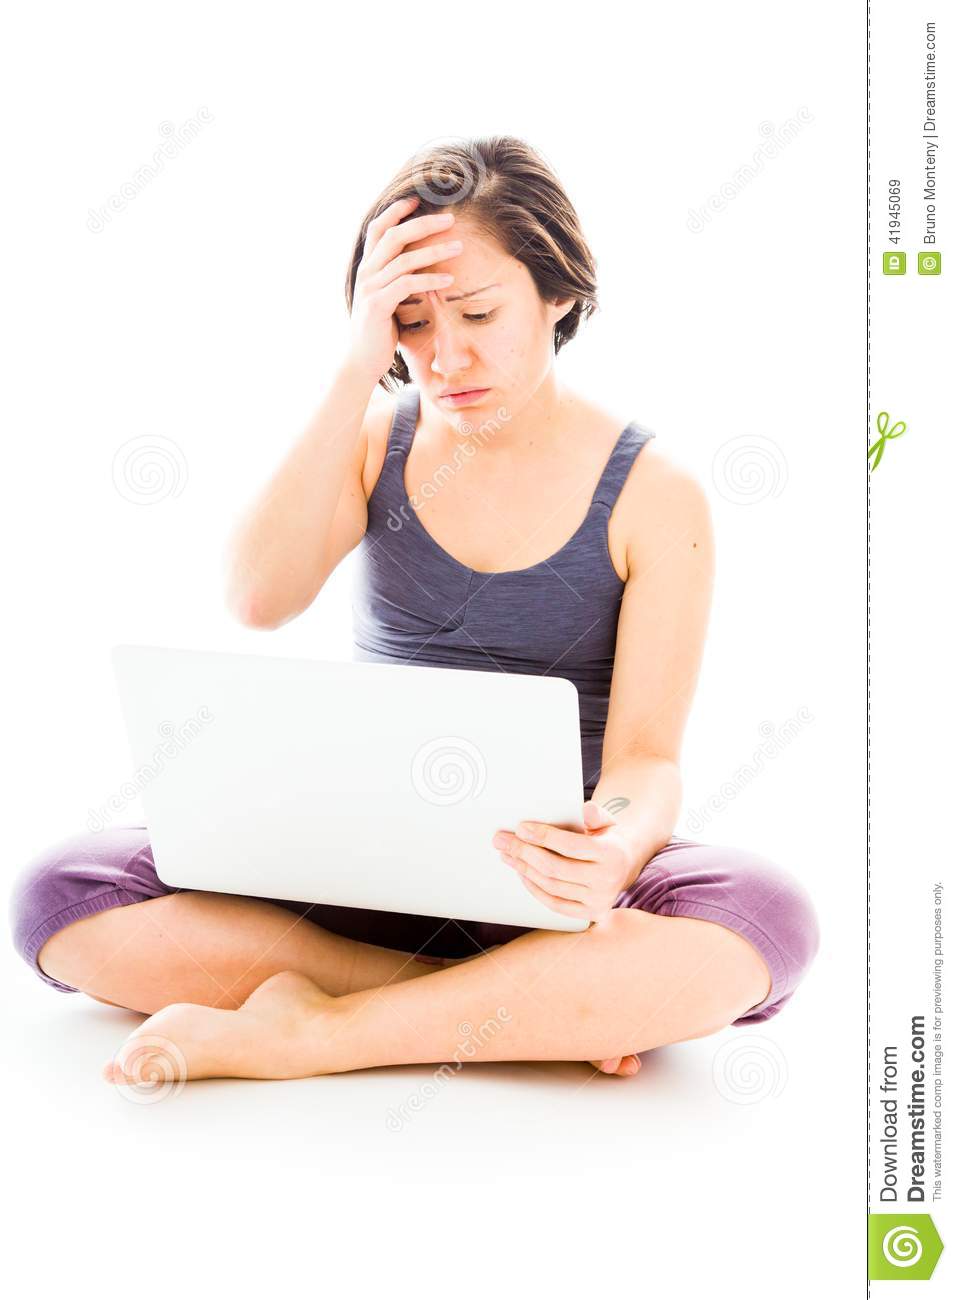 Young Woman Looking Stressed Using Laptop Stock Photo   Image    